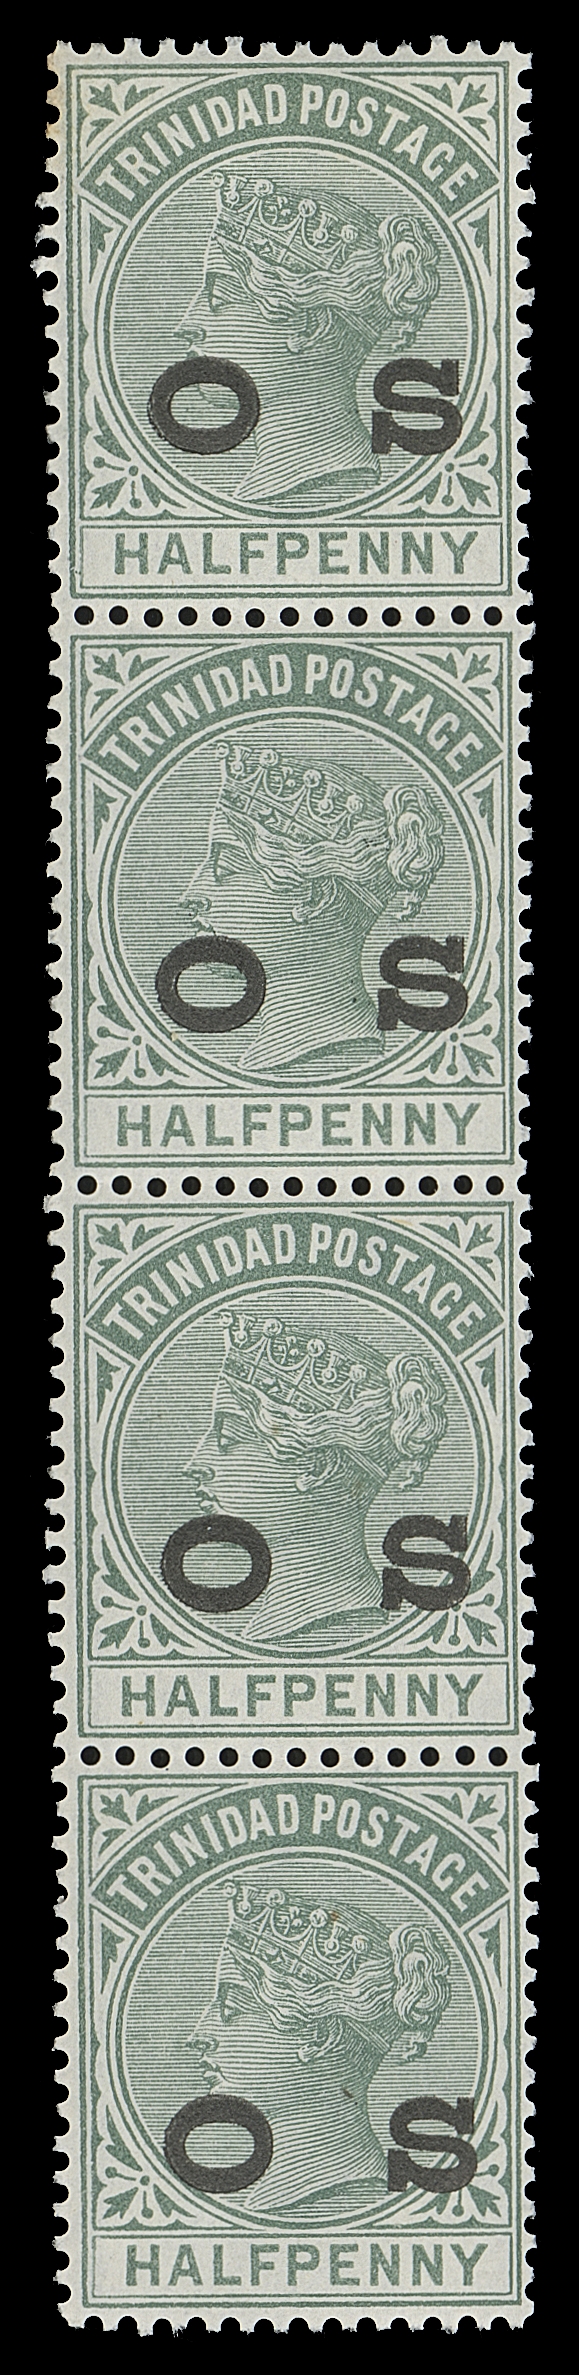 TRINIDAD  O1-O7,Large Official Service "O S" overprint in black, the set of seven in mint vertical strips of four, each with one or two stamps NH; one 6p with fault at foot and 5sh with minor toning on some perfs. A spectacular set believed to be the LARGEST MULTIPLES EXTANT, F-VF (SG O1-O7)